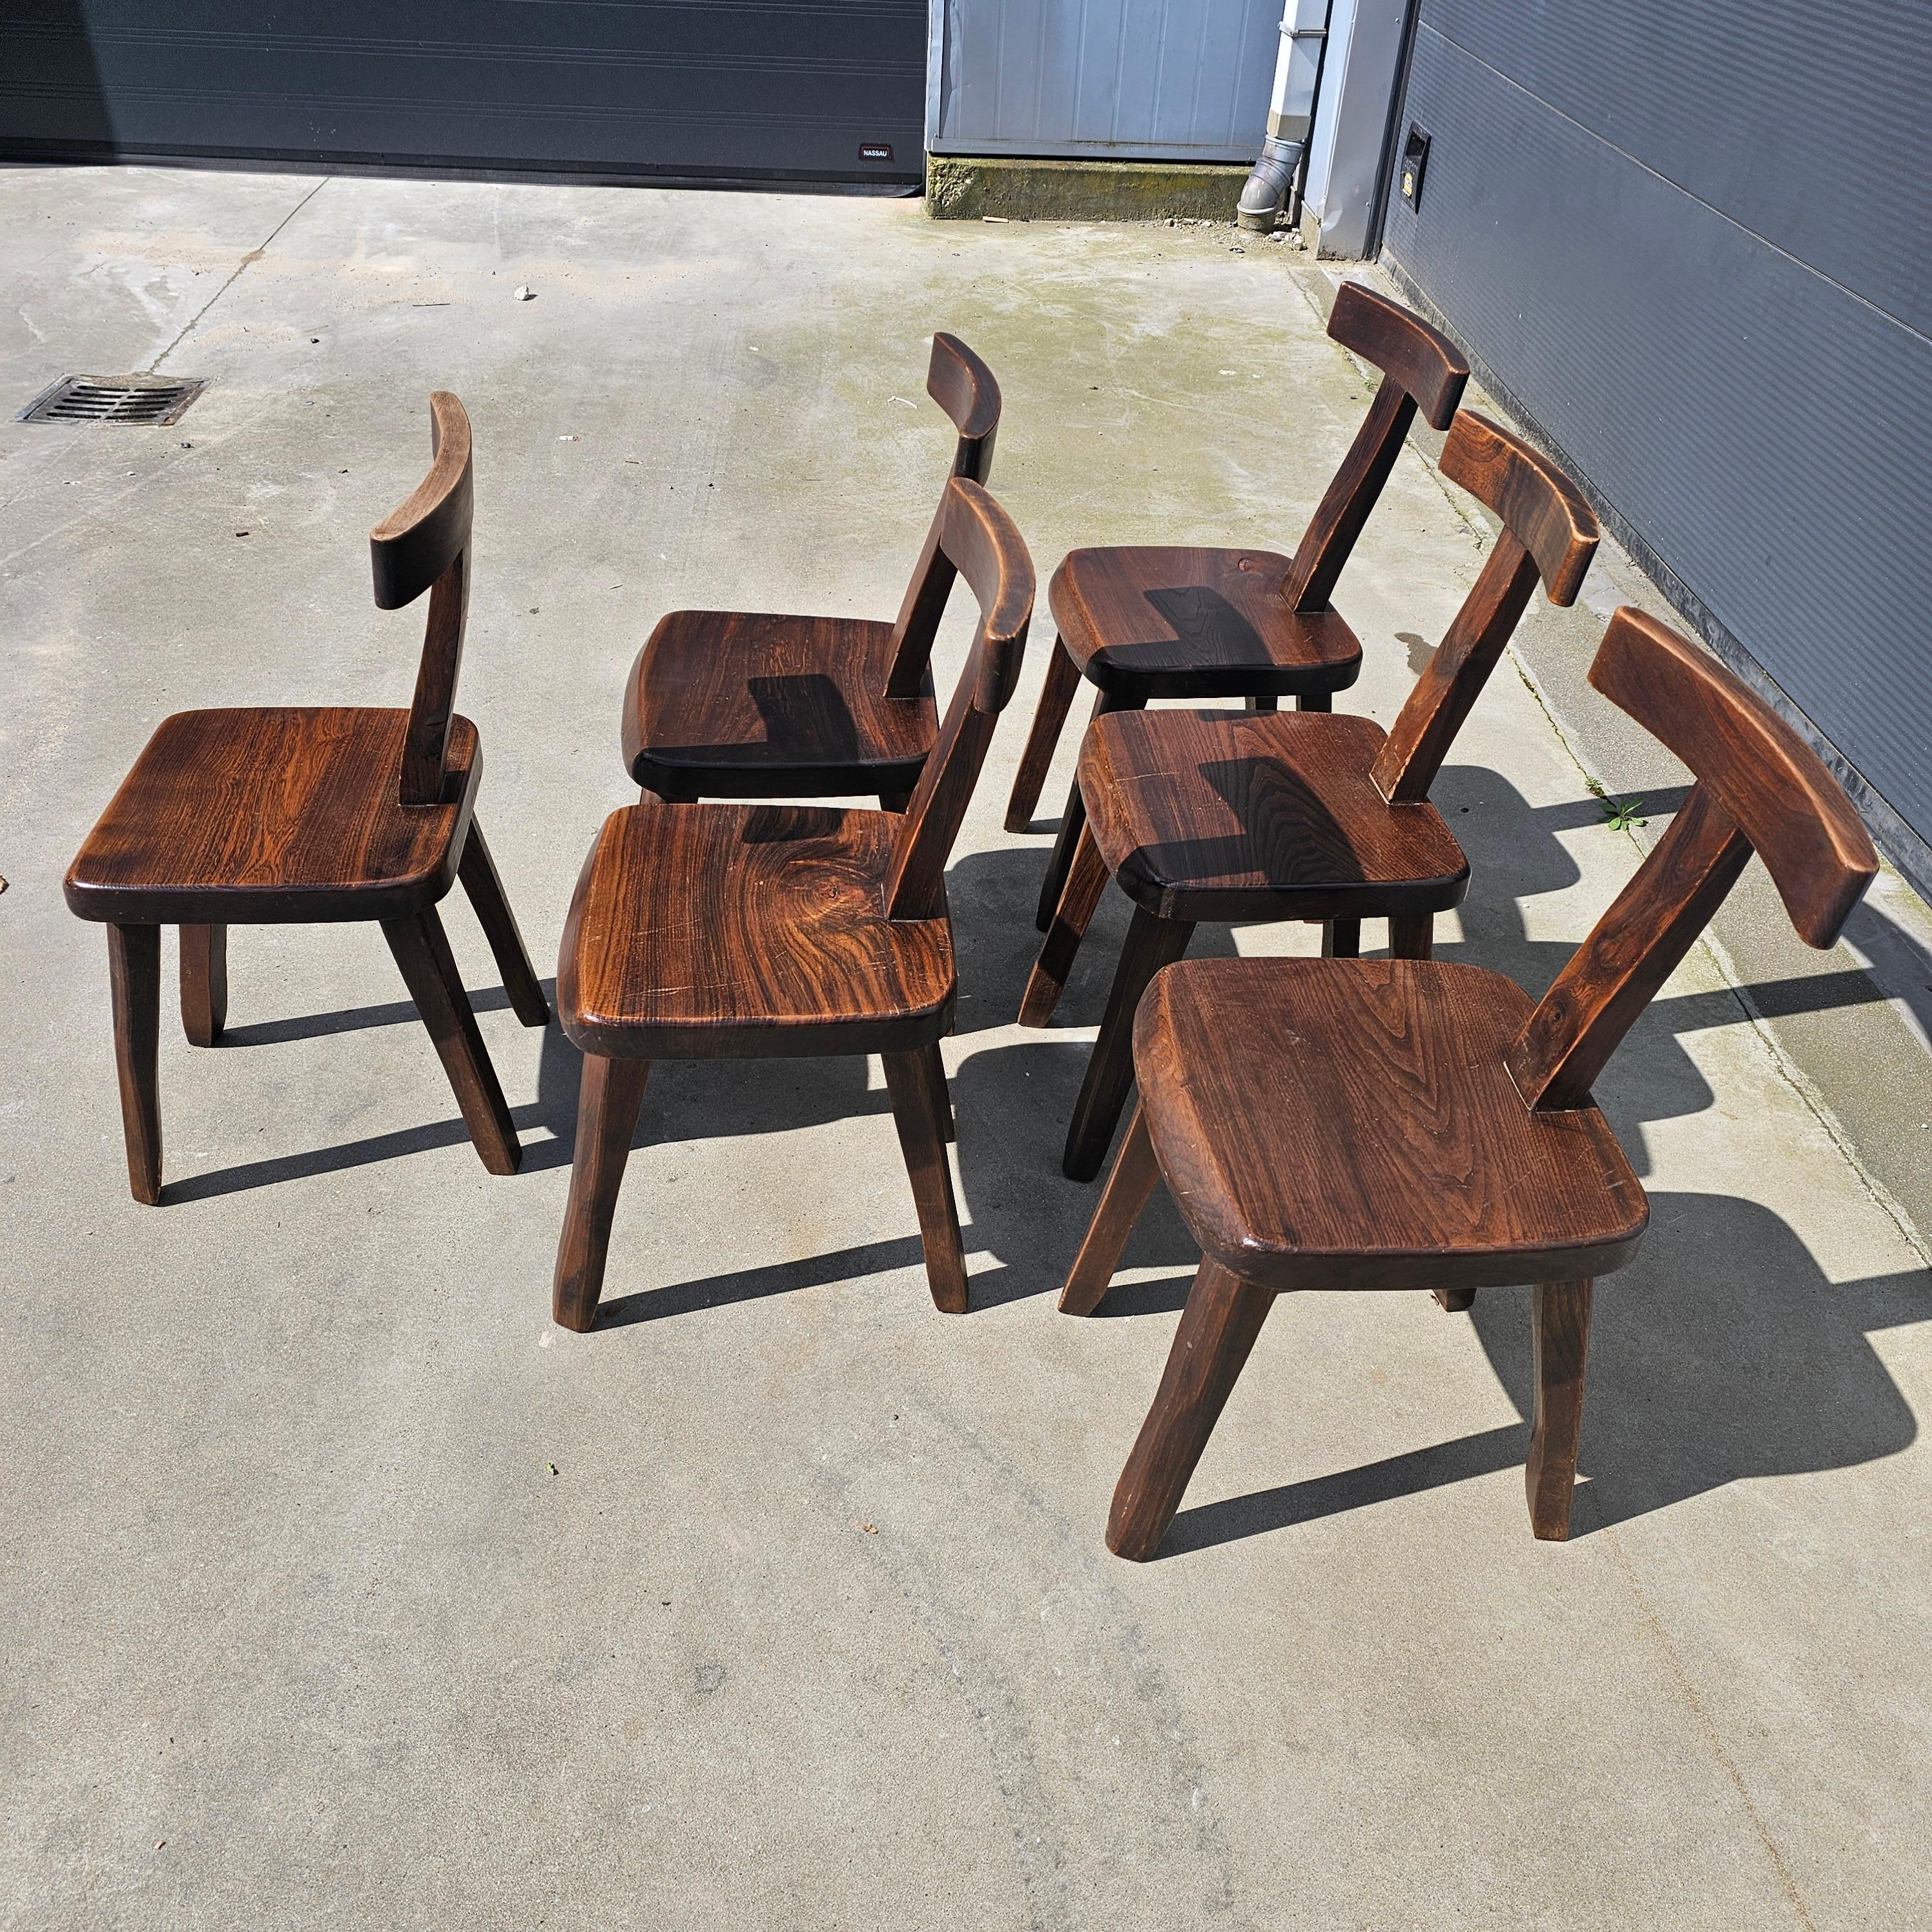 Mid-20th Century Brutalist Chairs from Olavi Hanninnen, Finland, 1960 For Sale